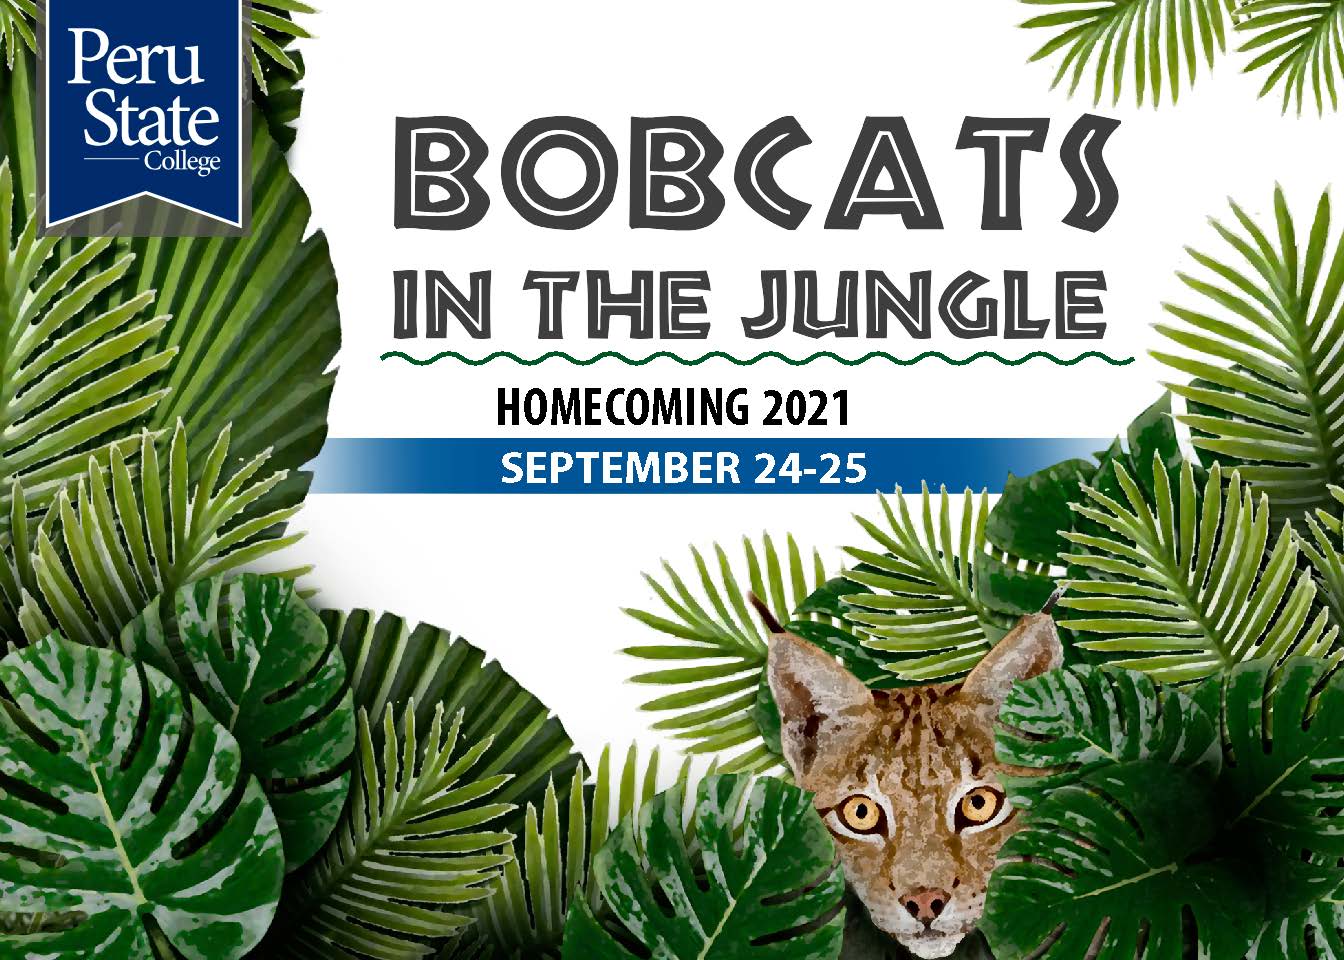 Bobcats in the Jungle